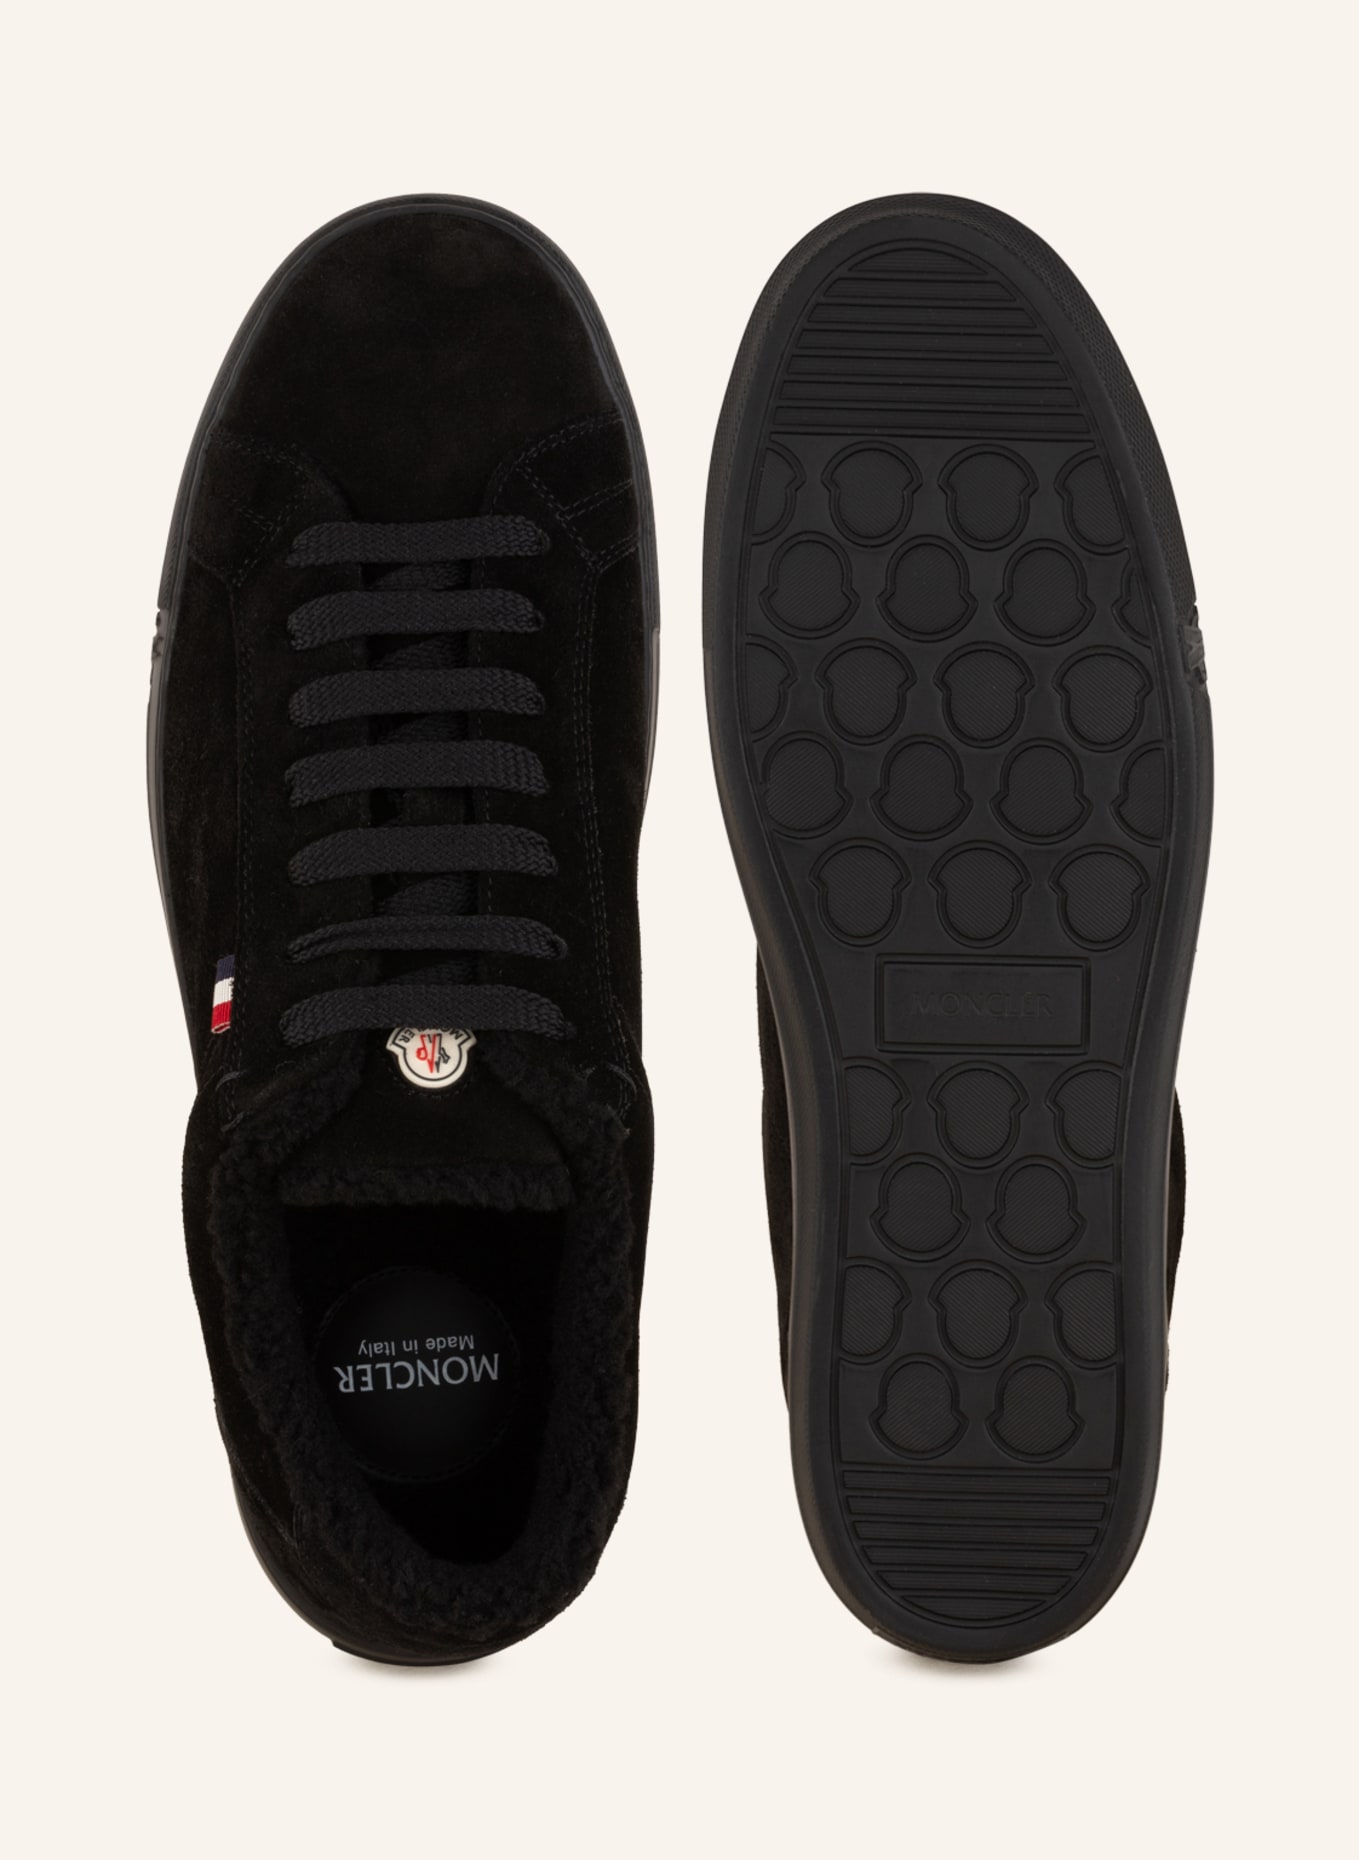 Moncler New Monaco sneakers for Men - Black in UAE | Level Shoes